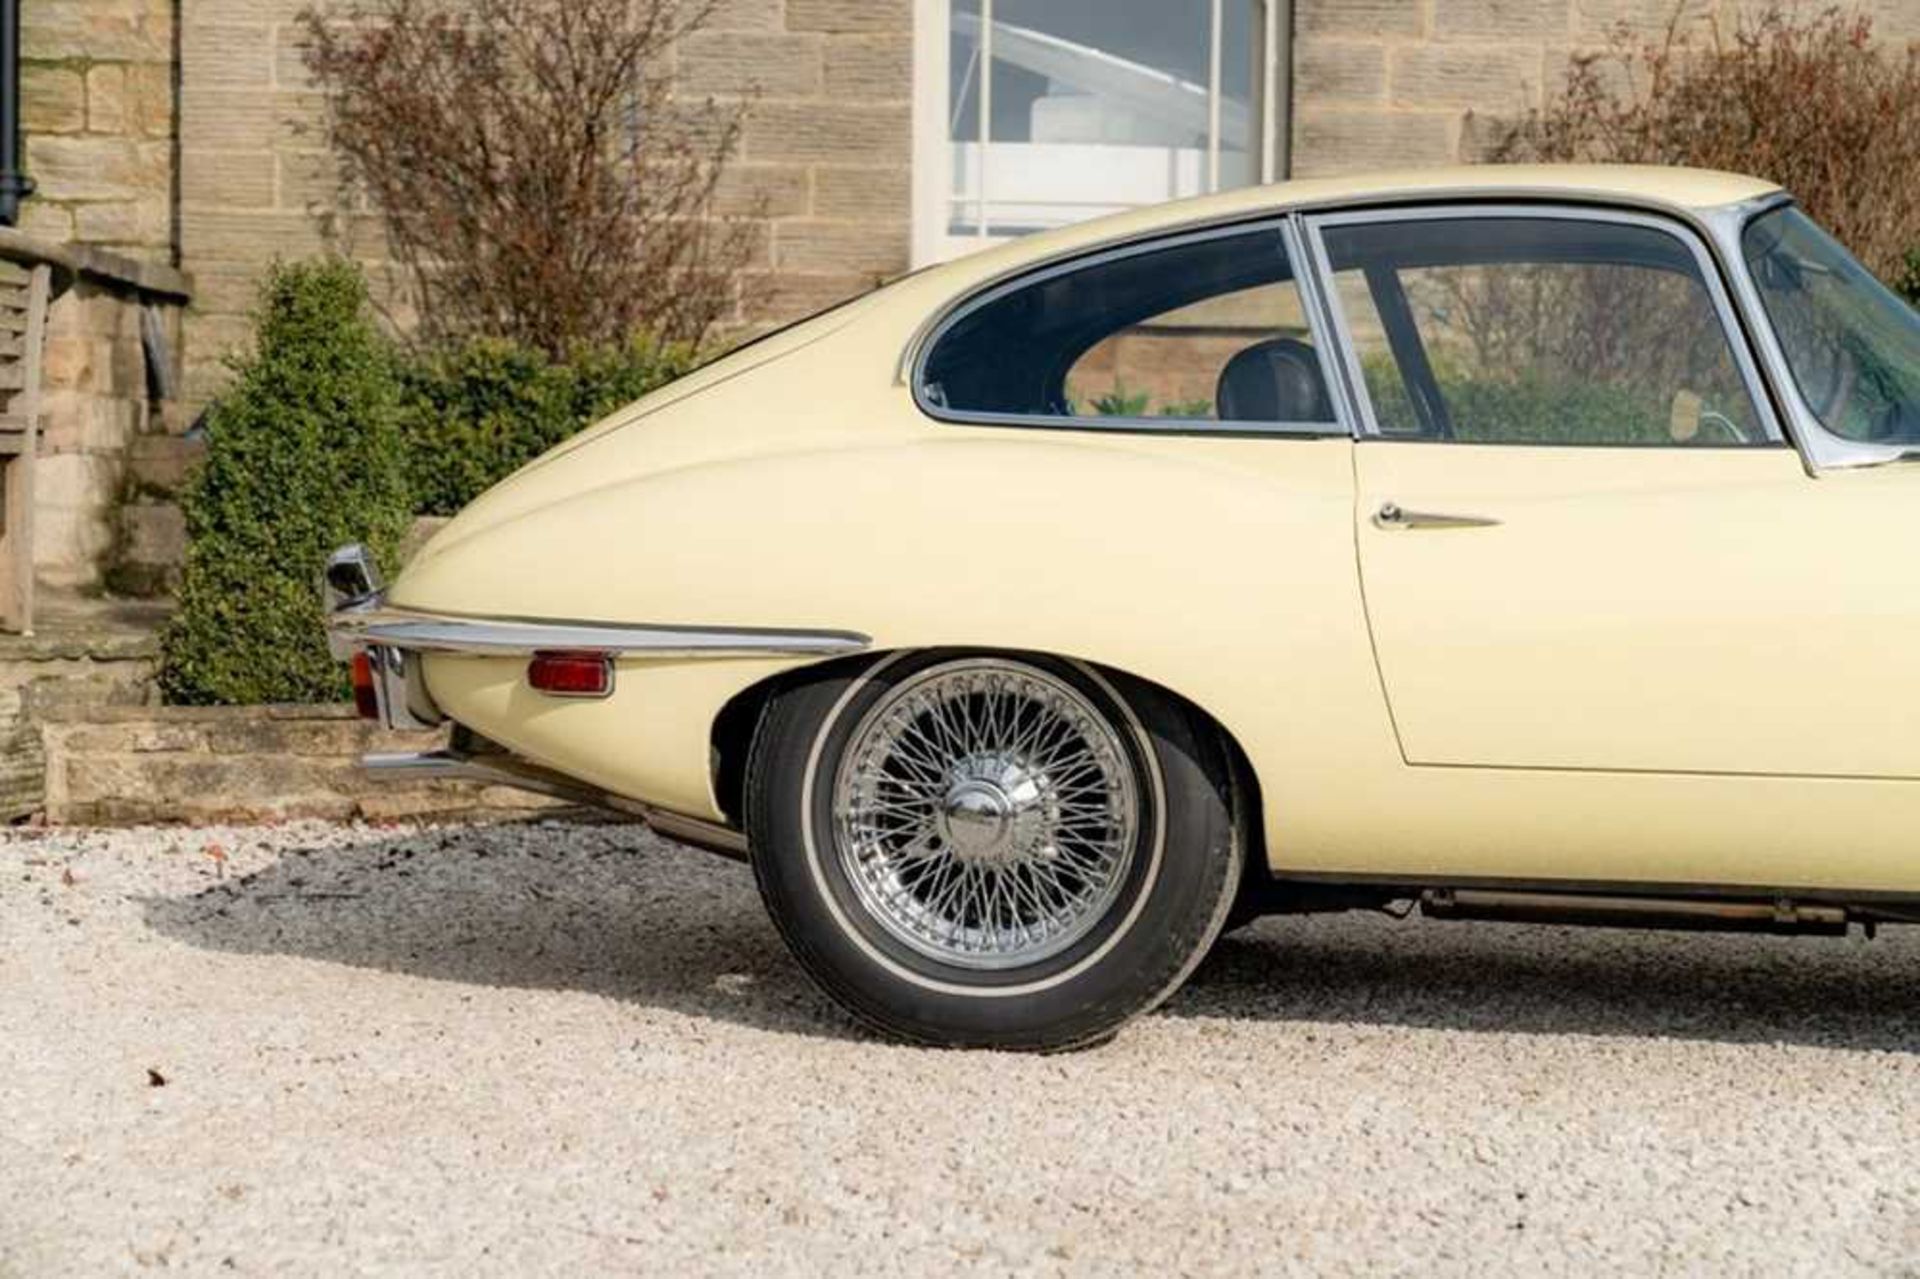 1968 Jaguar E-Type 4.2 Litre Coupe Genuine 44,000 miles from new - Image 15 of 68